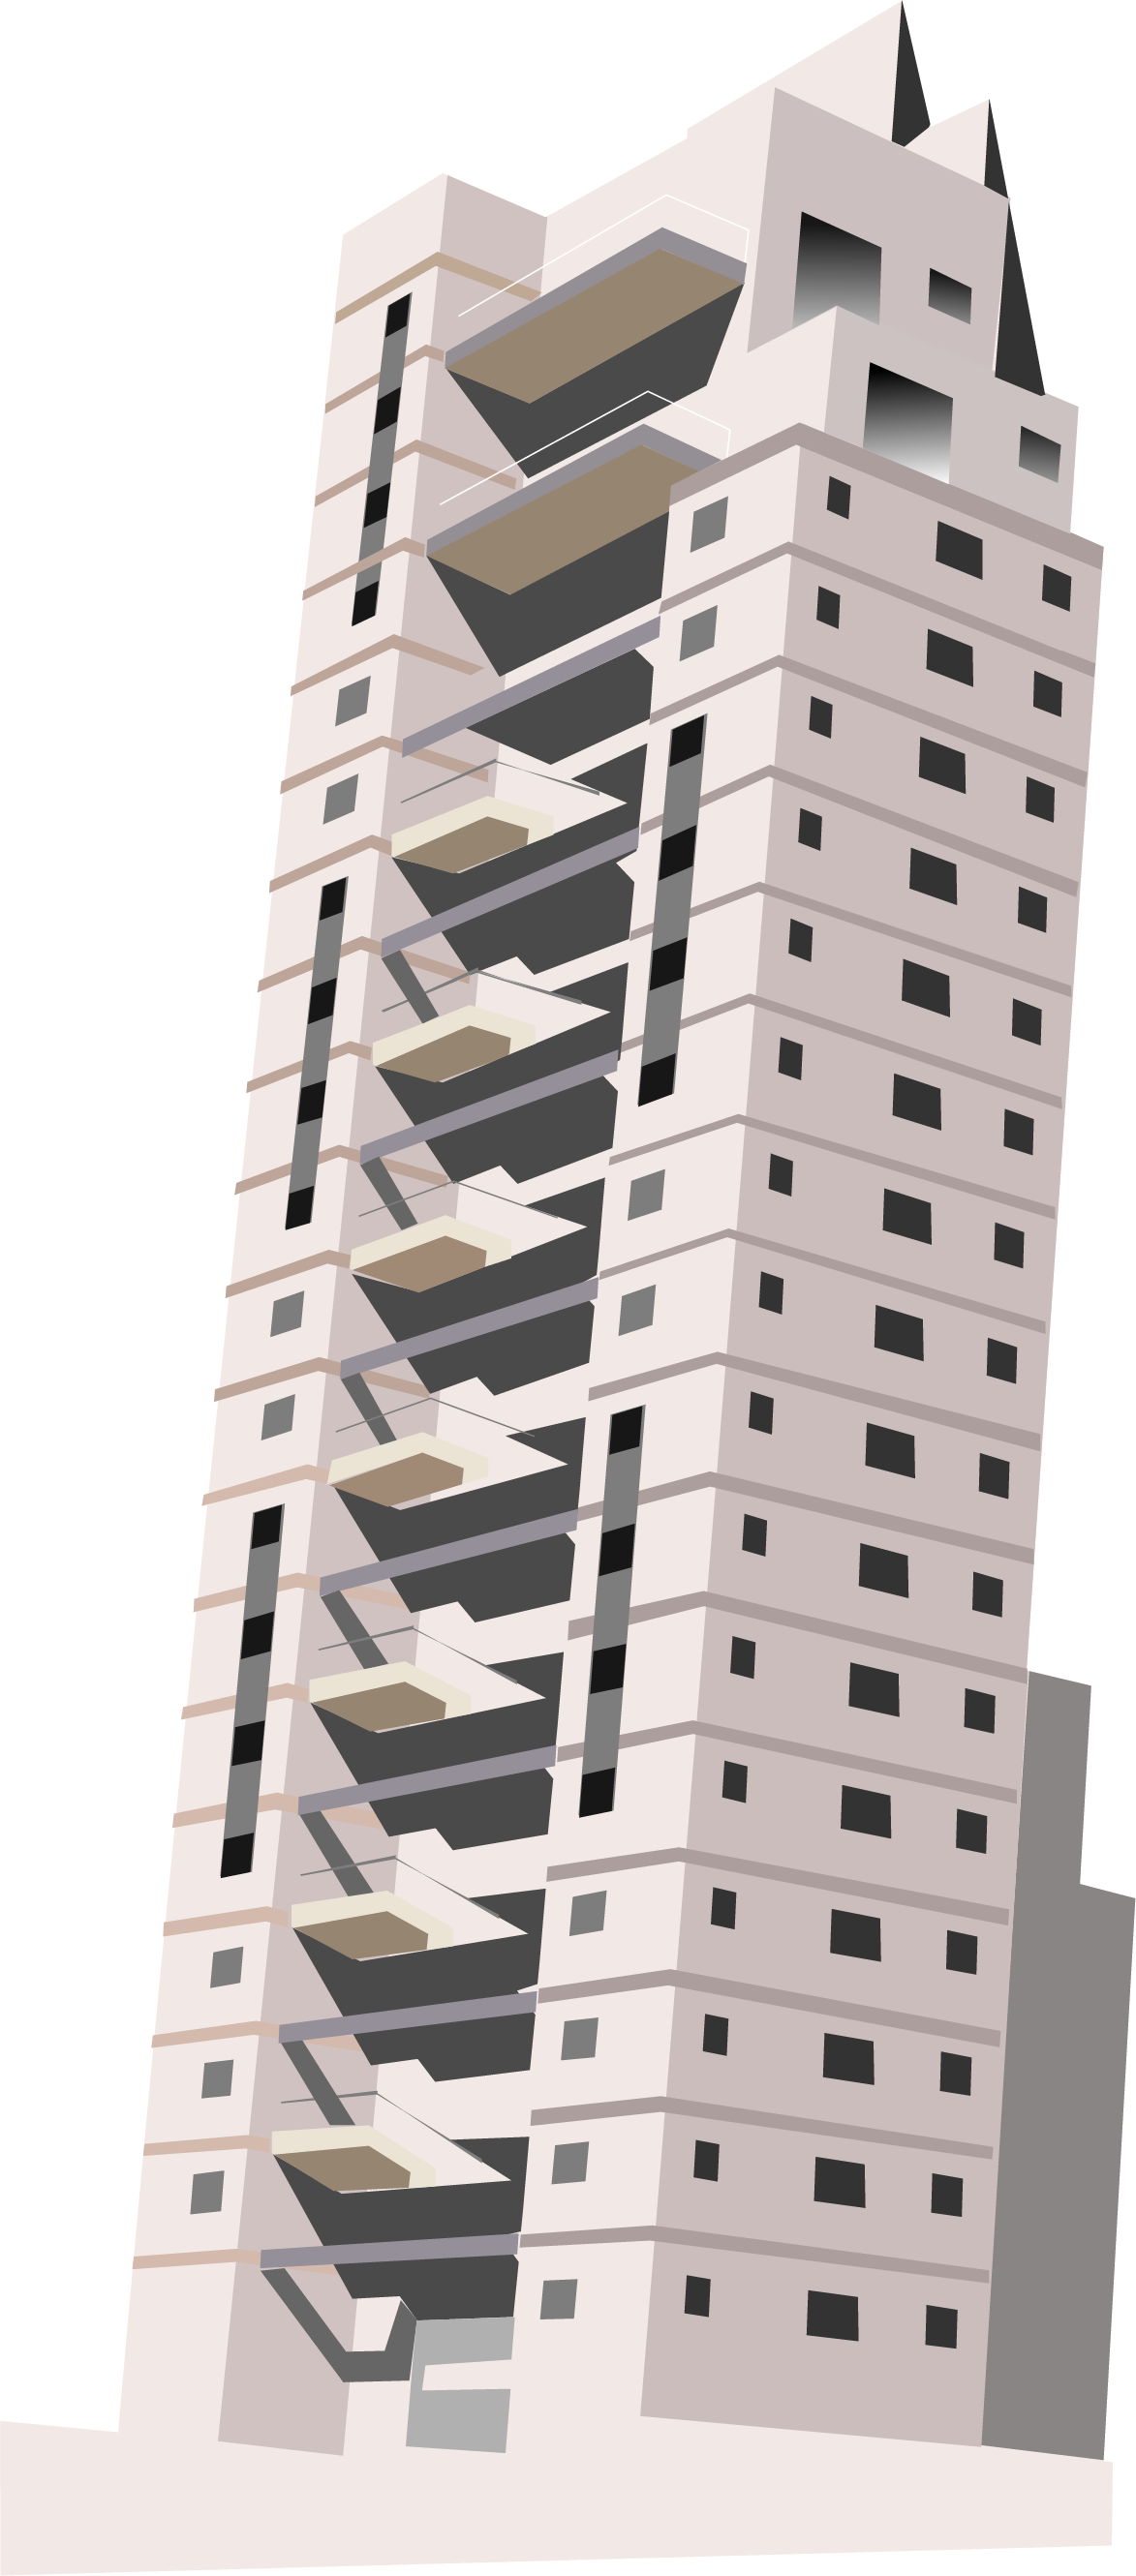 A Building With Balconies And Windows